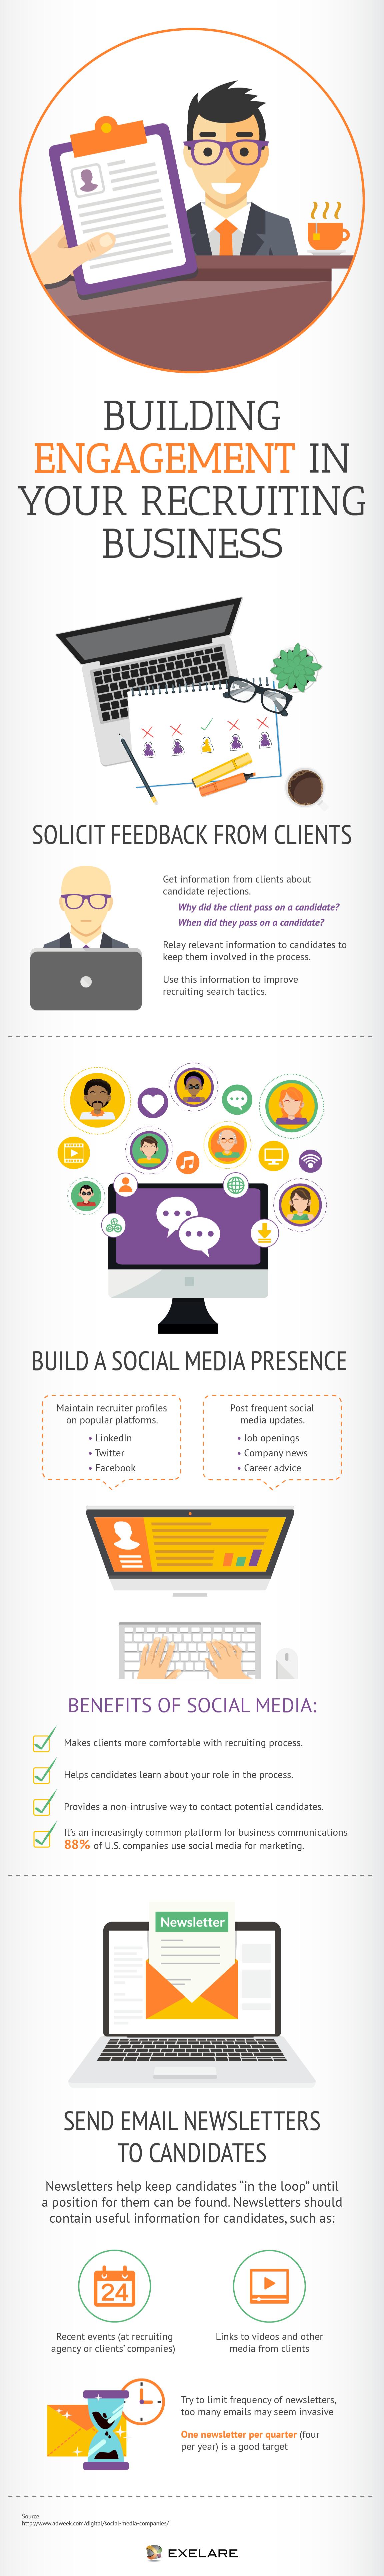 building-engagement-in-your-recruiting-business-infographic